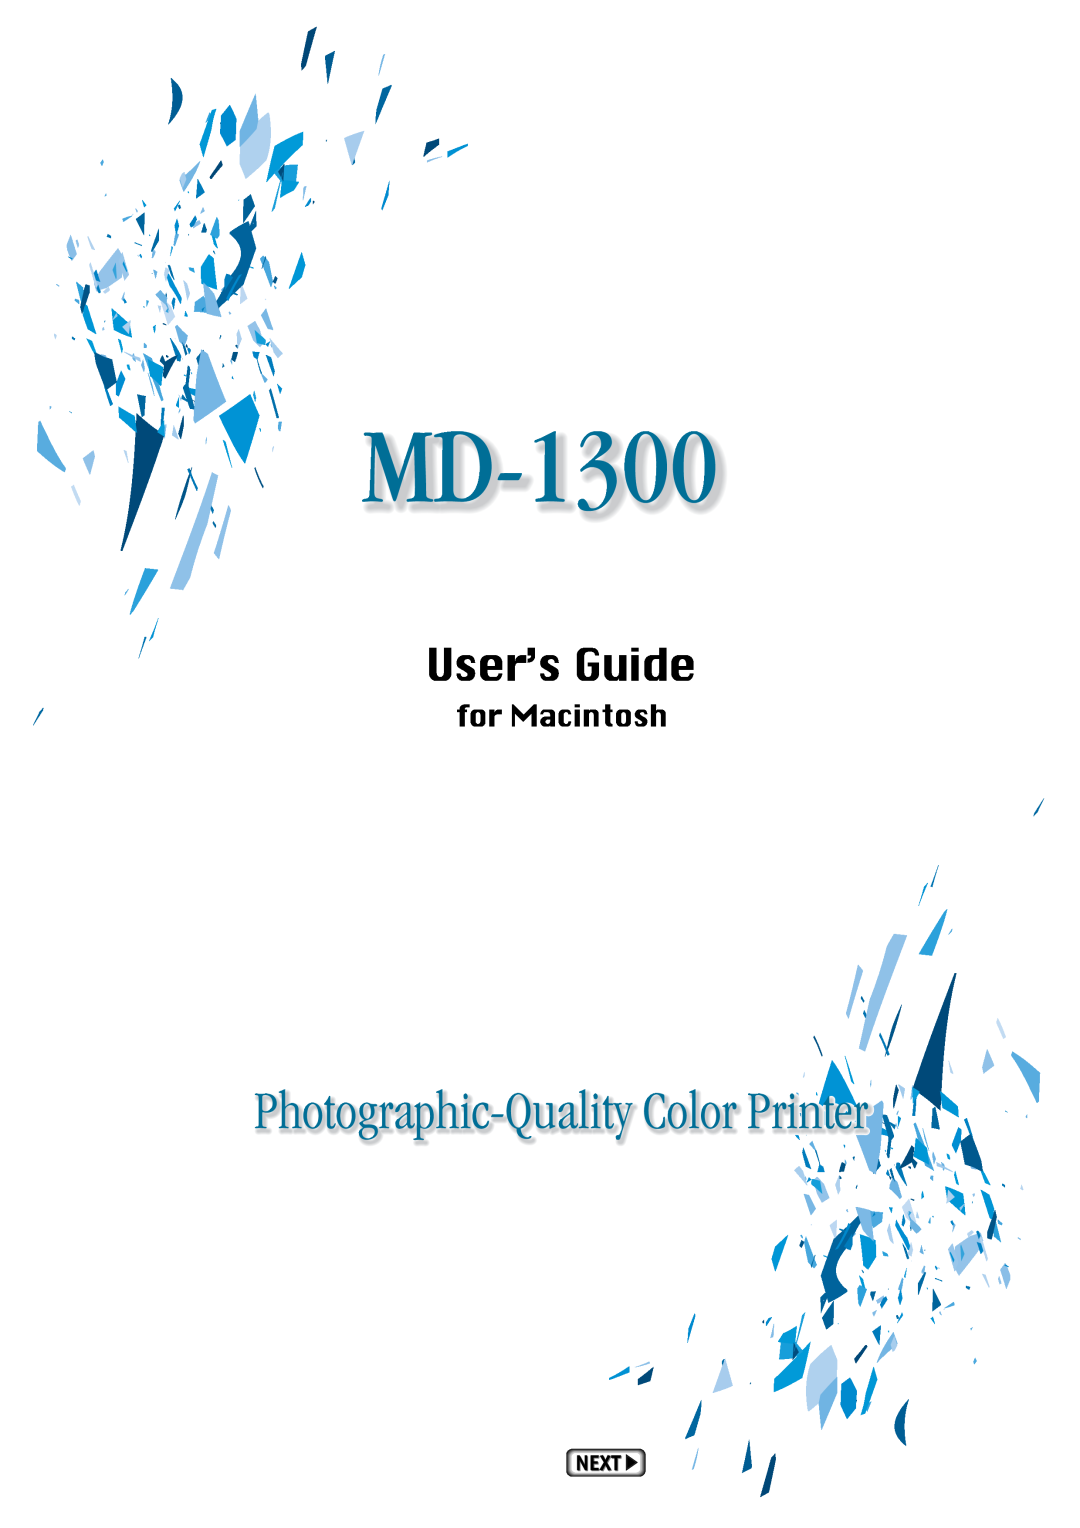 Alps Electric MD-1300 manual User’s Guide, for Macintosh 